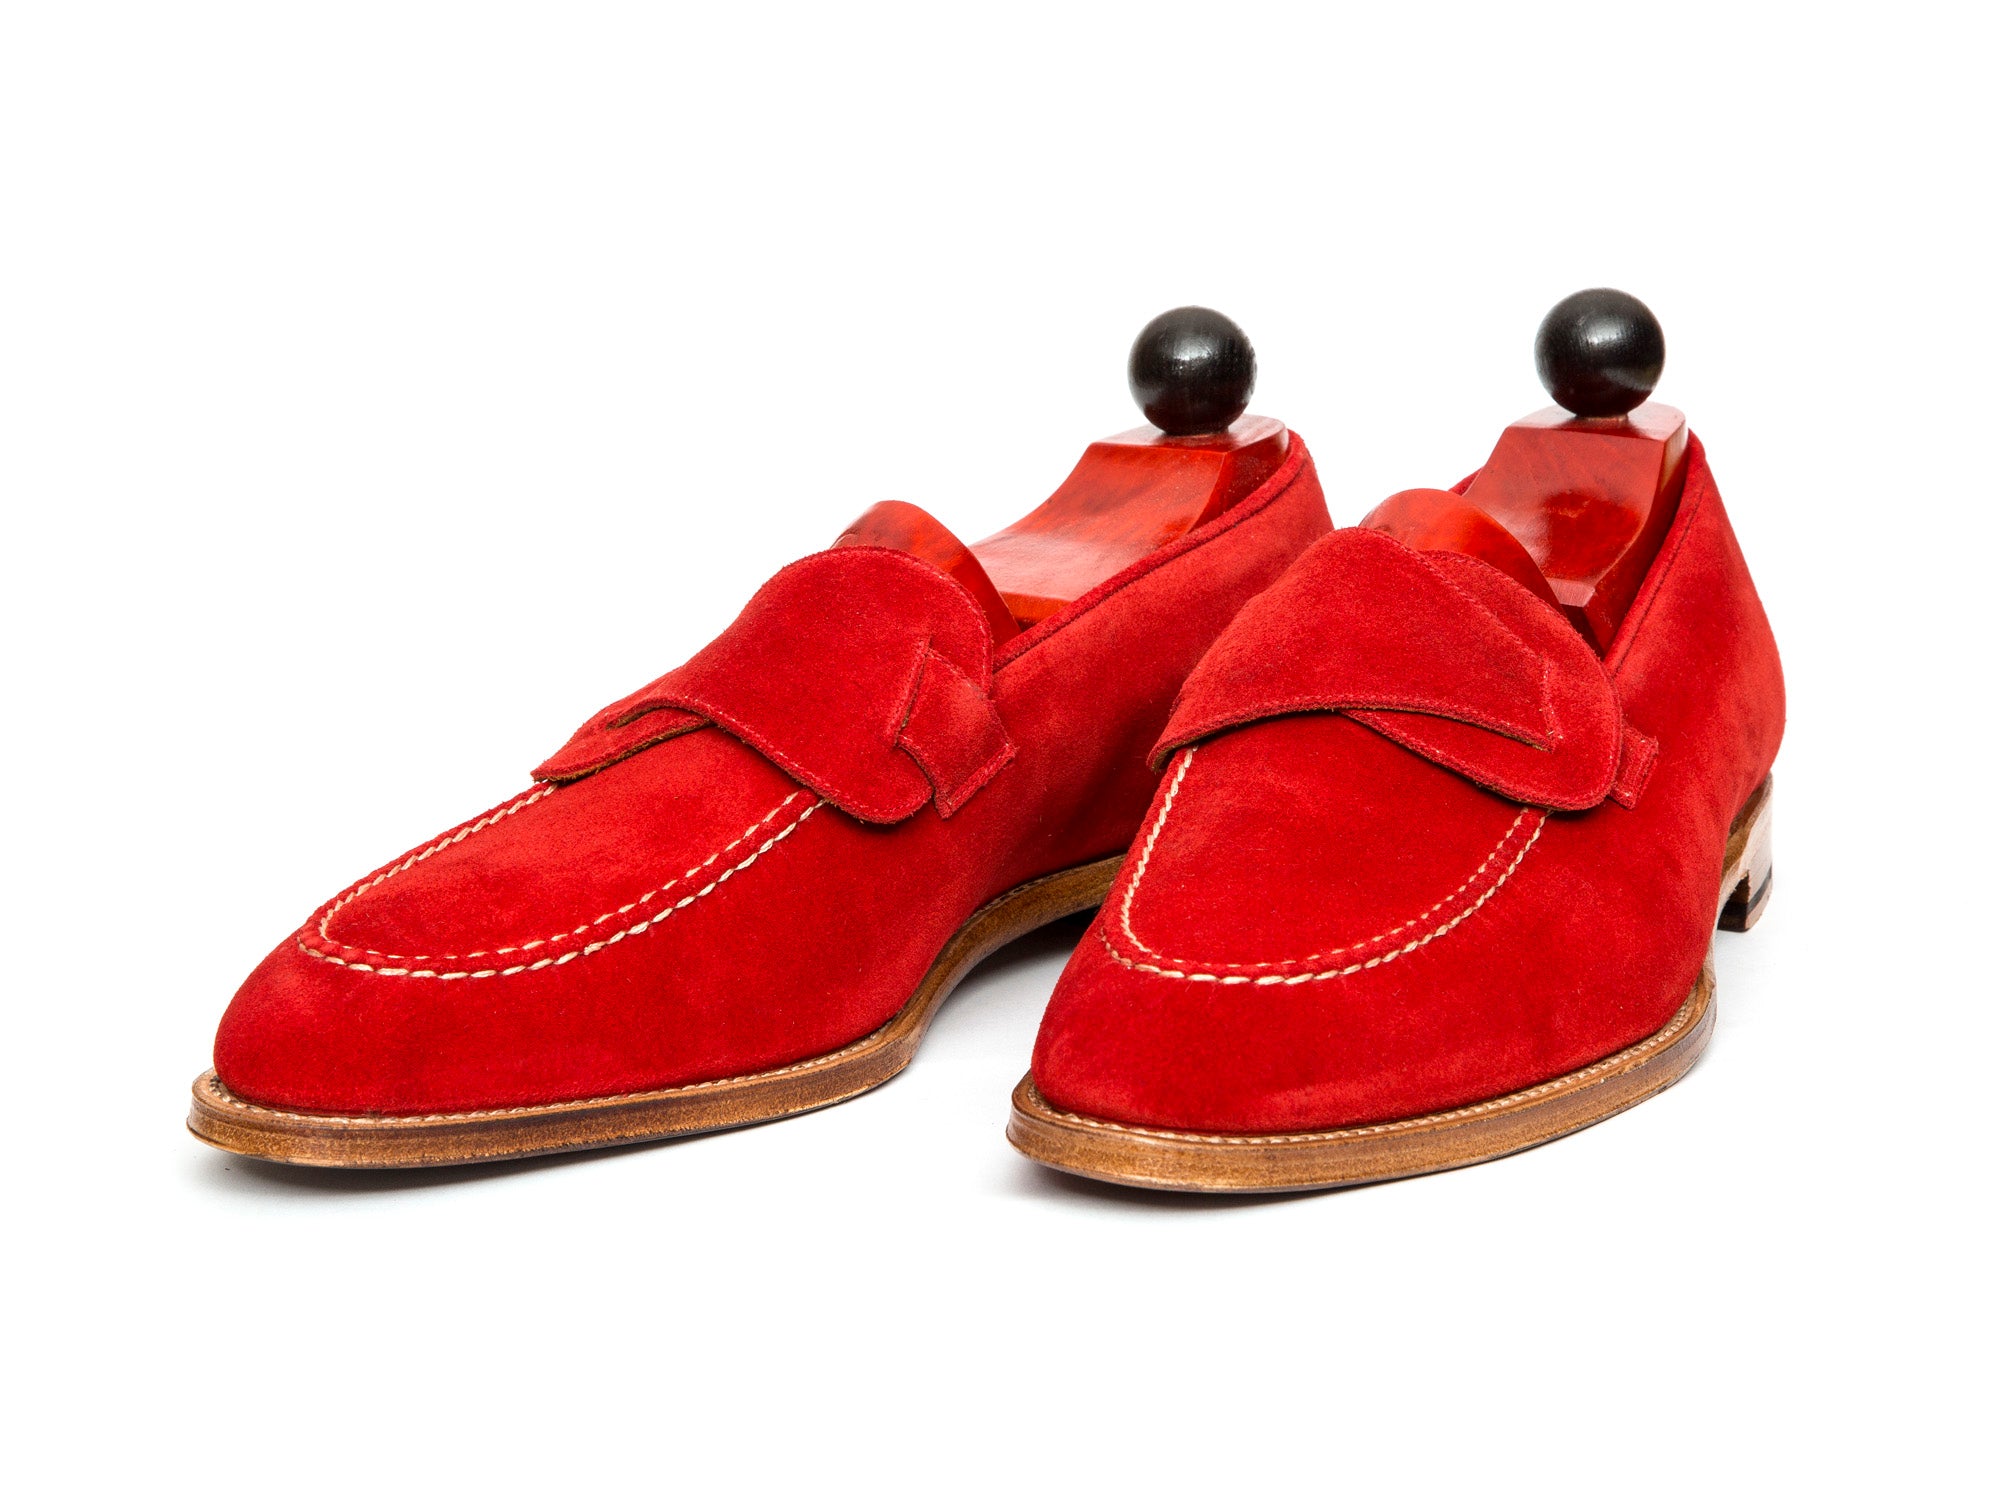 Hawthorne - MTO - Red Suede - TMG Last - Natural Single Leather Sole